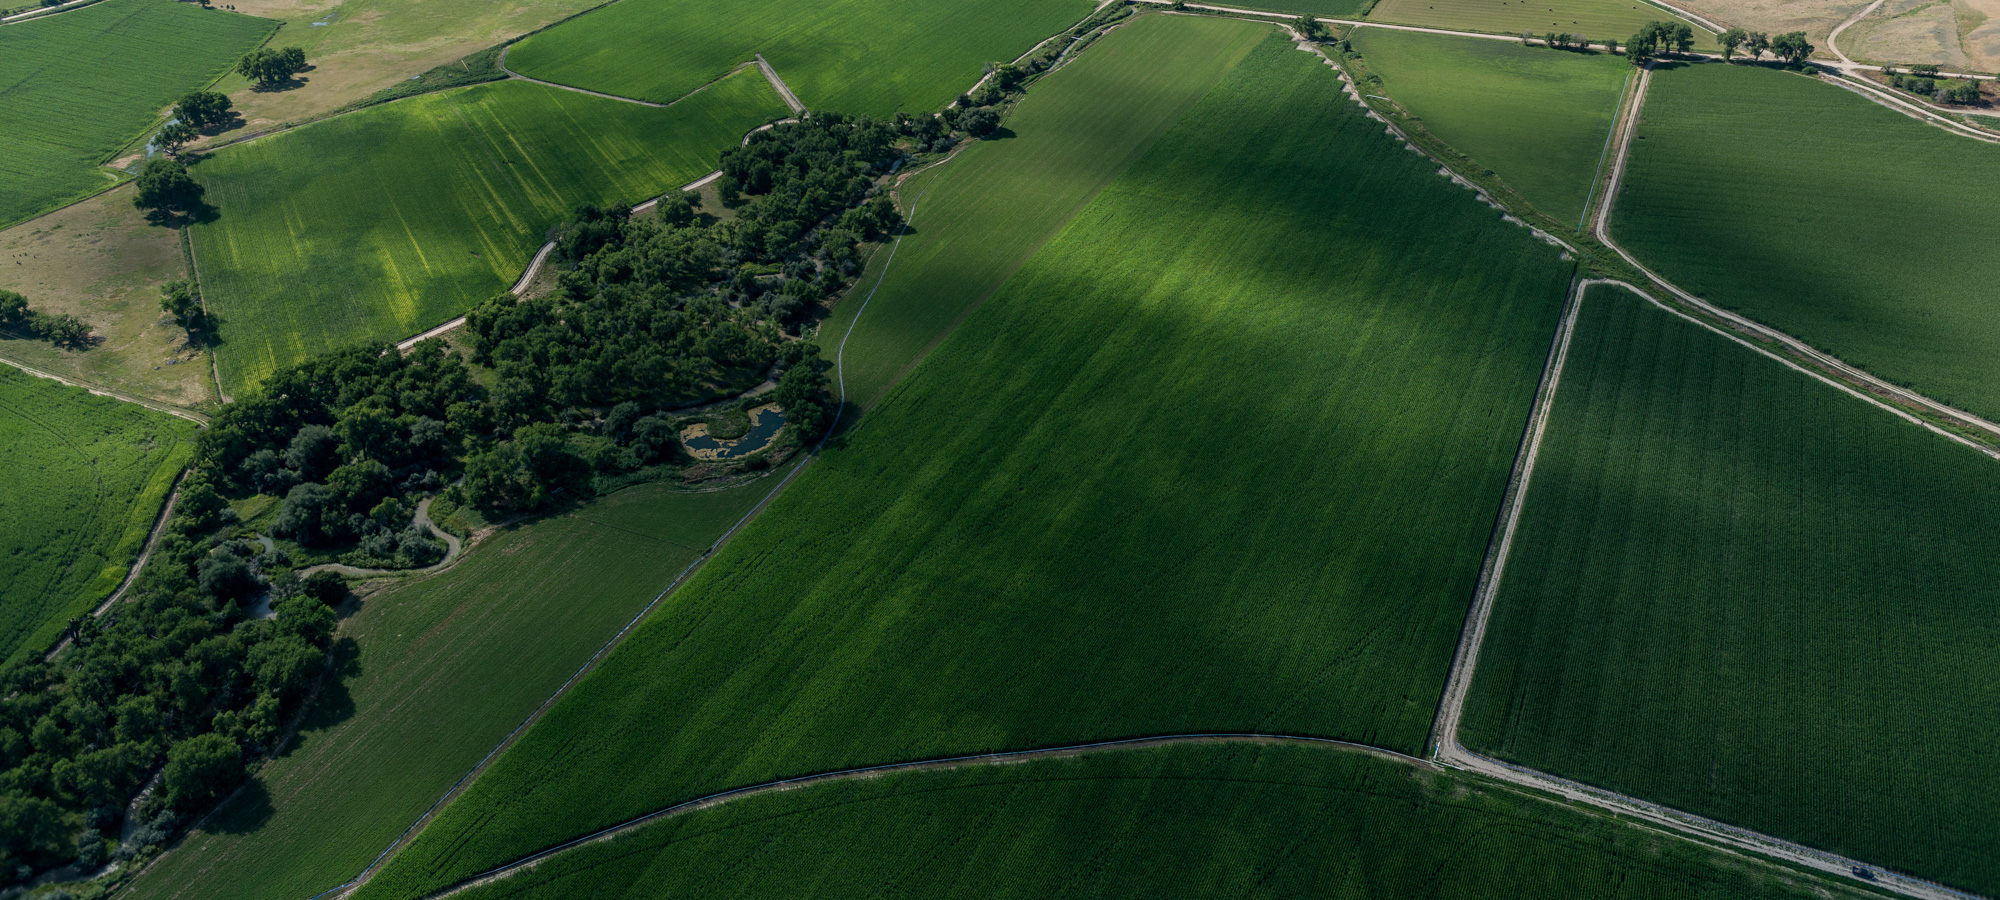 An aerial image of irrigated green fields with cloud shadows in Morril County, Nebraska.